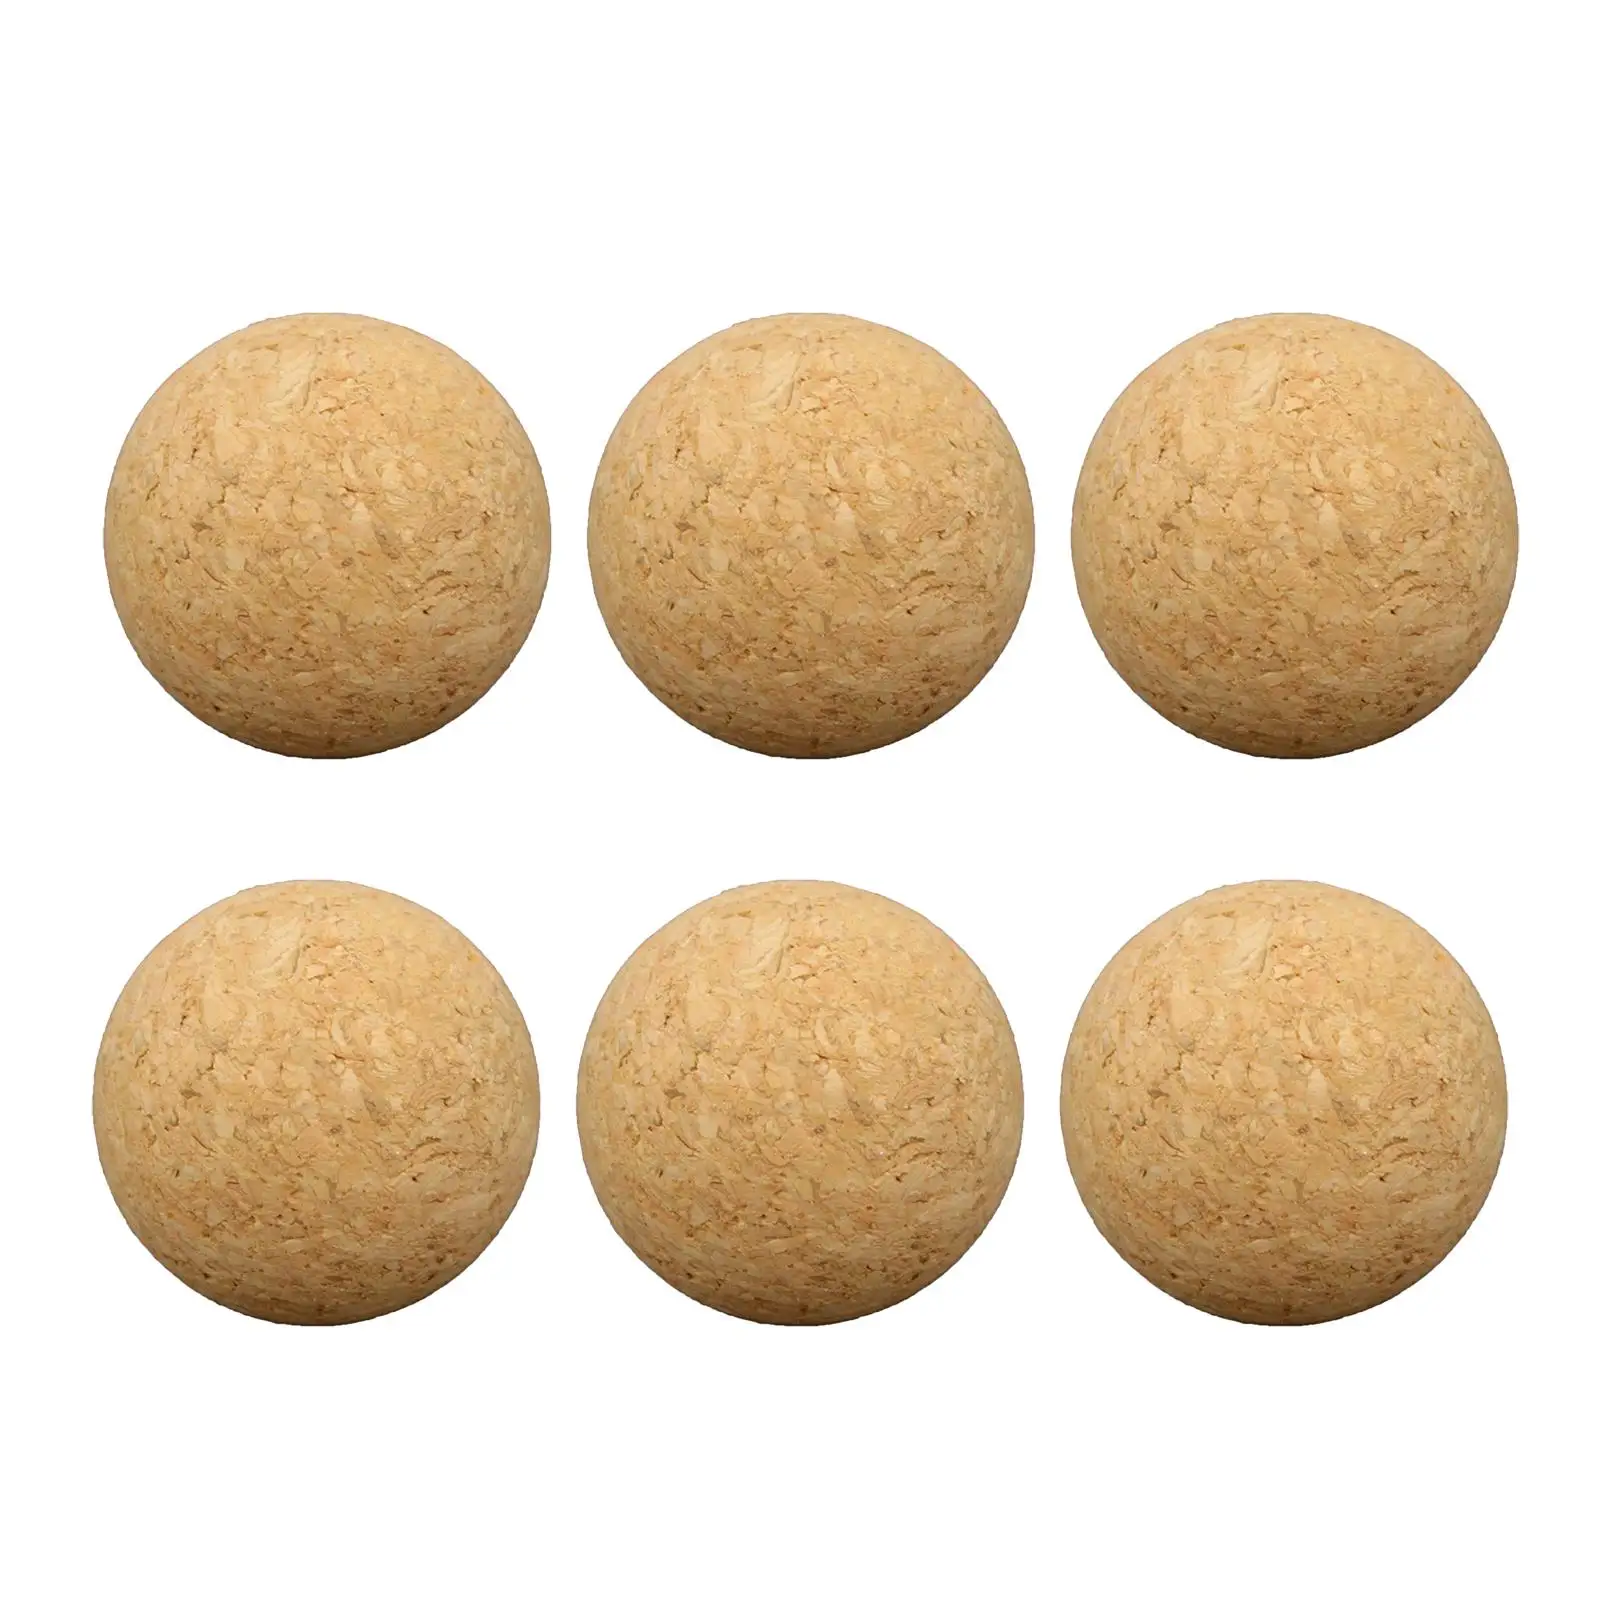 6x Table Football Cork Table Soccer Football Machine Replacement Accessories